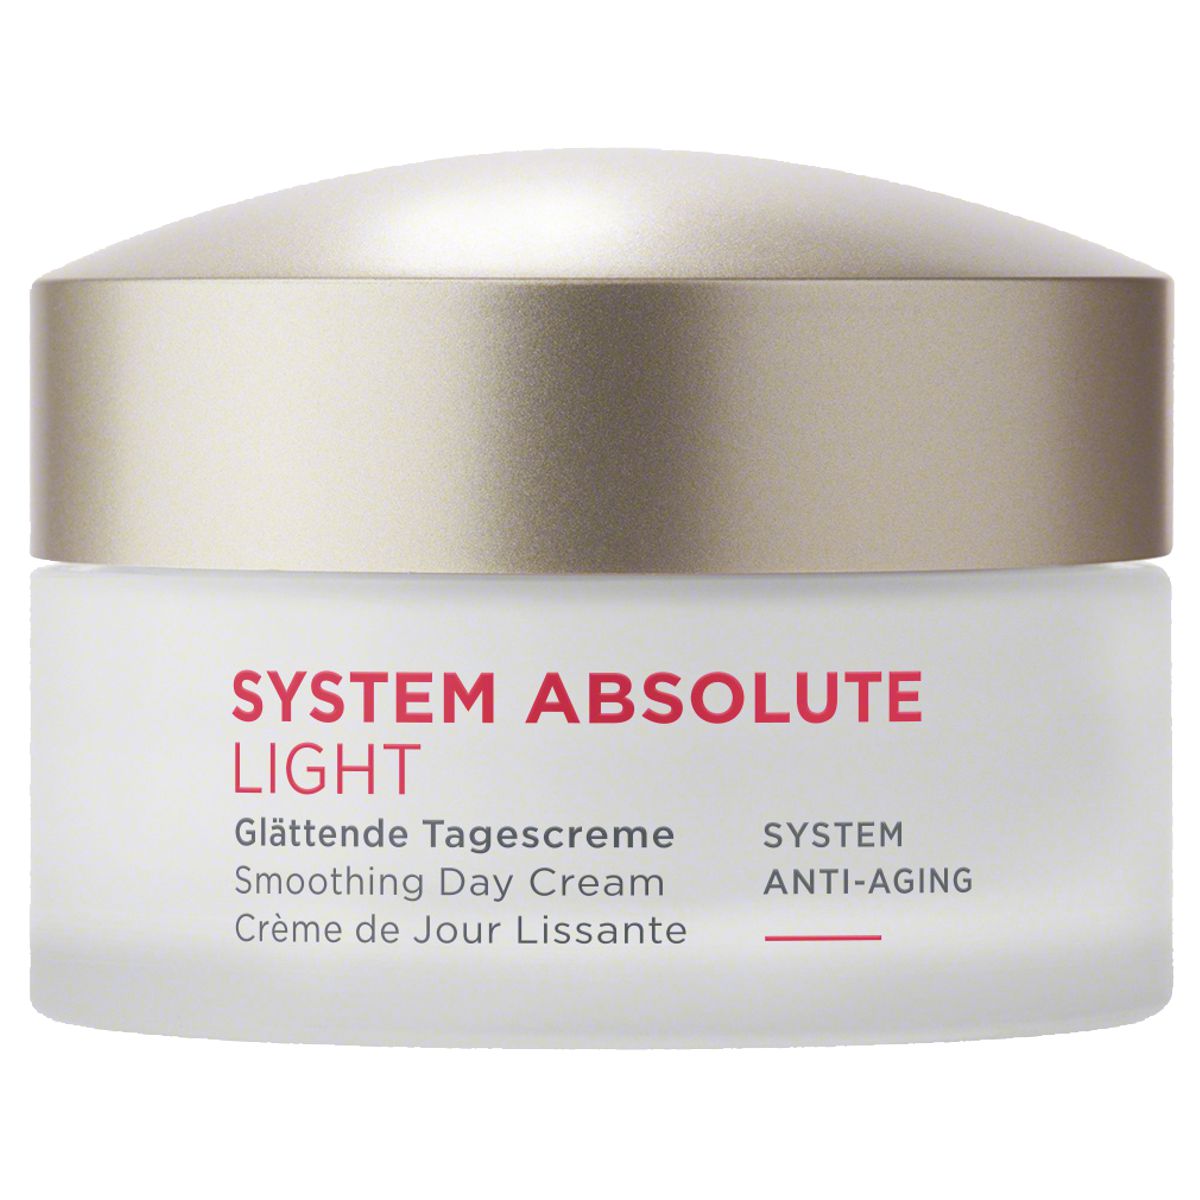 Annemarie Börlind Absolute System Anti Aging absolute Tagescreme light